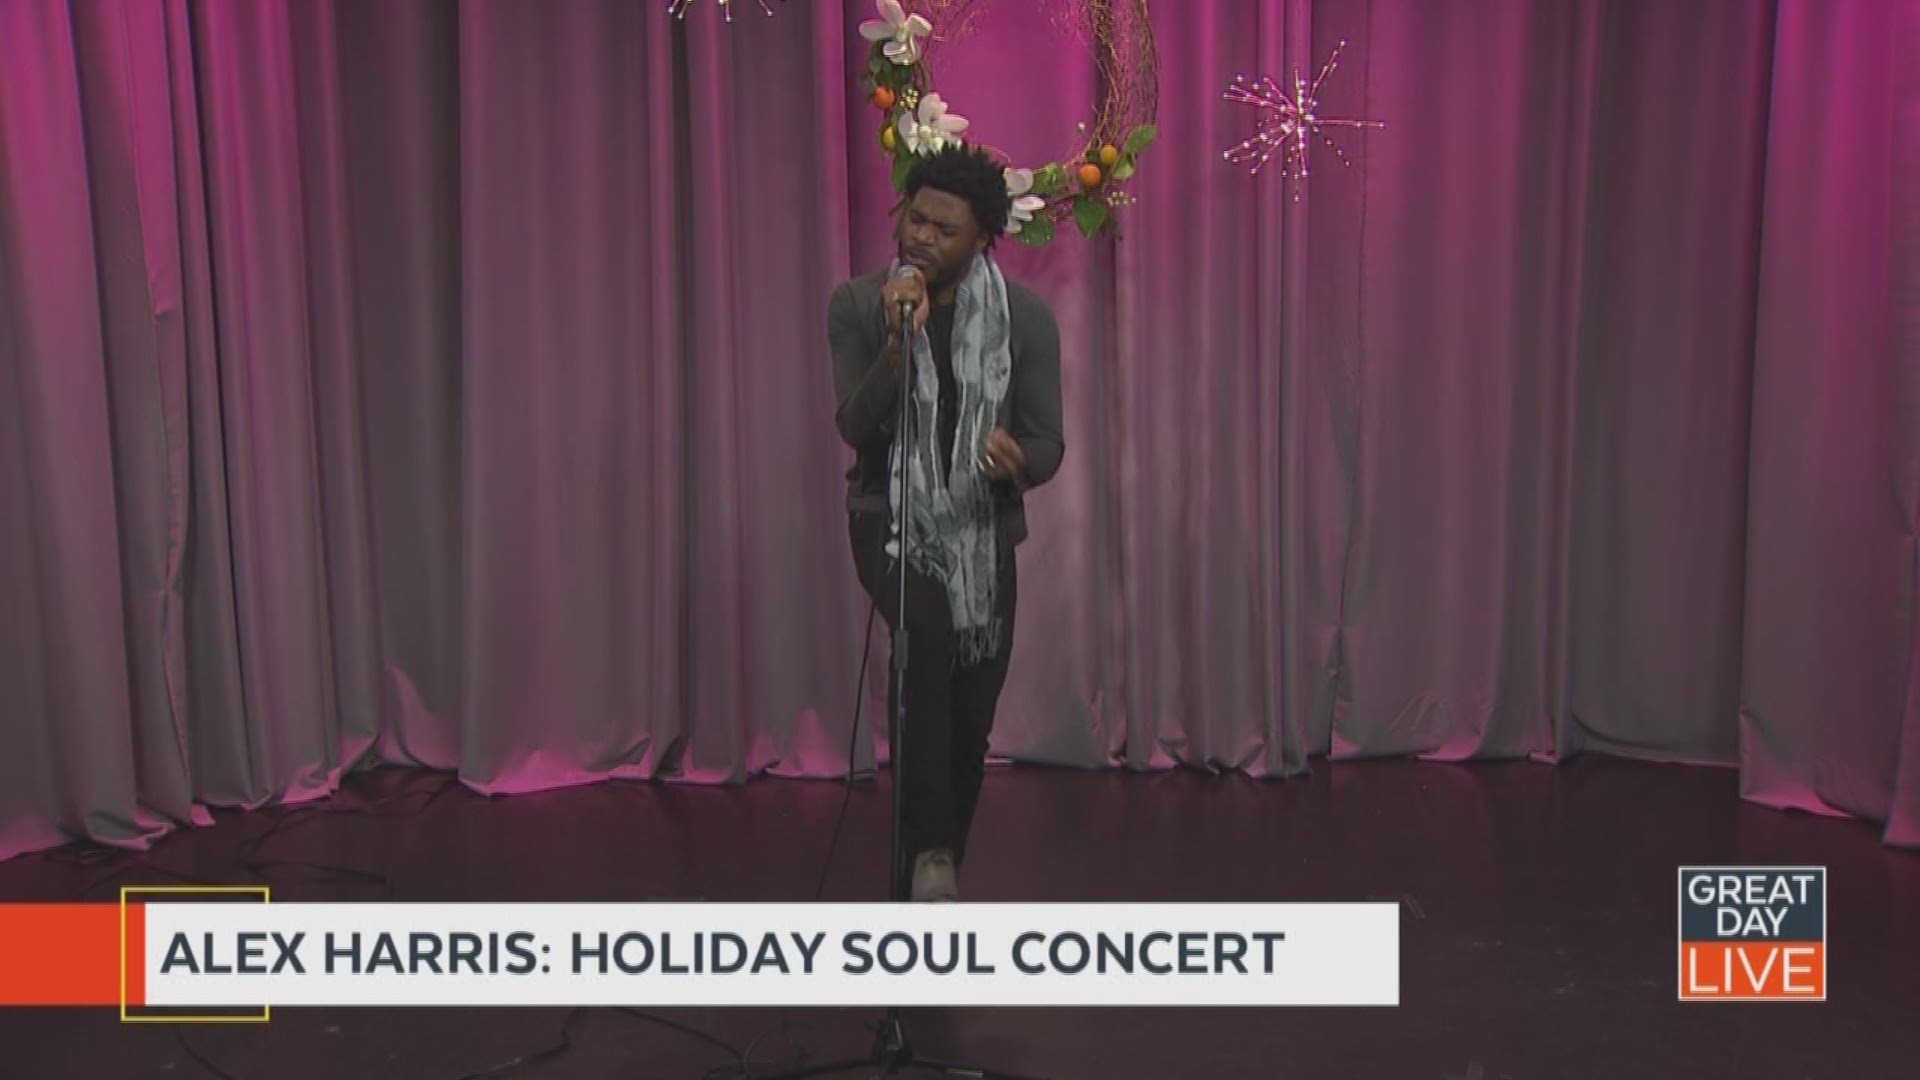 You can catch Alex live for his “Holiday Soul” concert at the Palladium Theater this Sunday evening at 6 p.m. For tickets visit mypalladium.org.